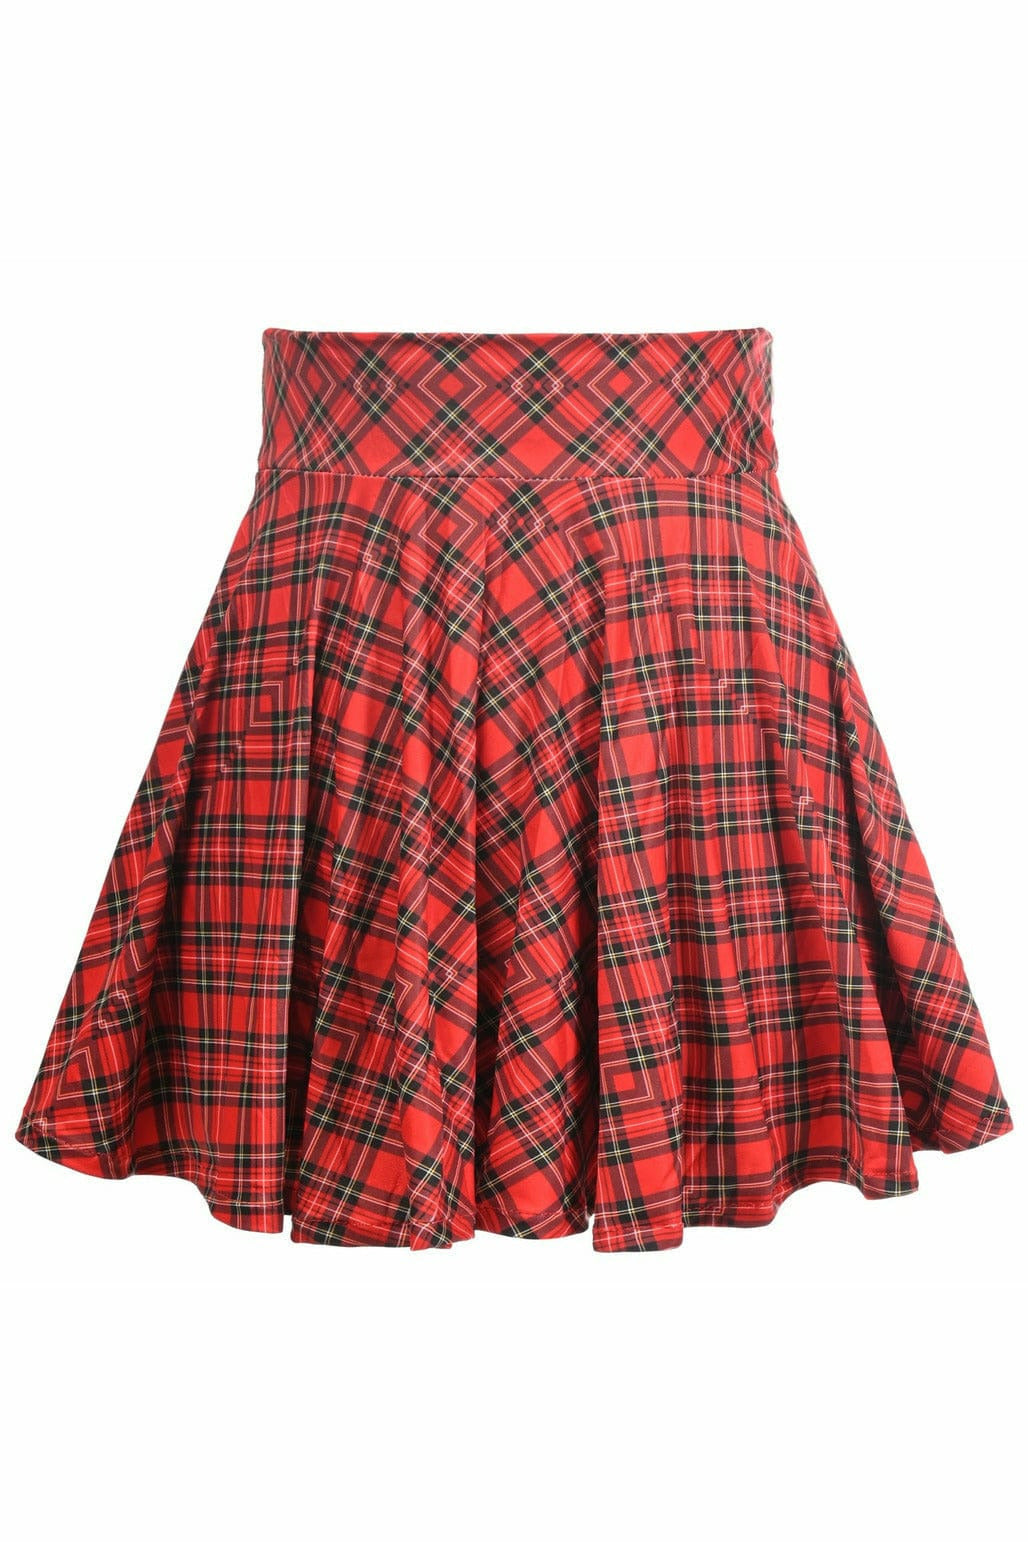 Red Plaid Stretch Lycra Skirt-Daisy Corsets